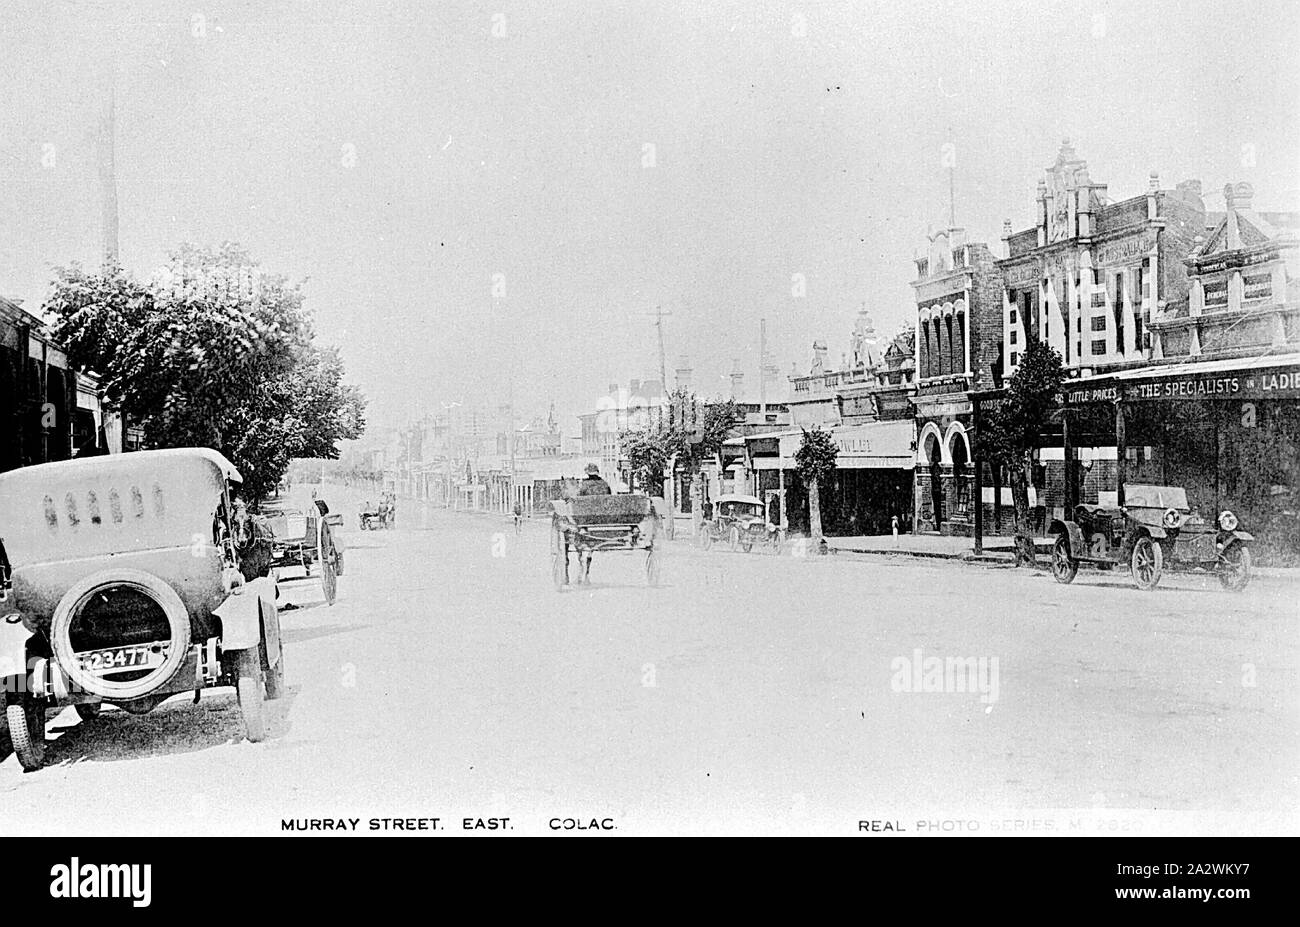 Negative - Colac, Victoria, circa 1925, Murray Street, Colac with motor cars and horse-drawn vehicles Stock Photo